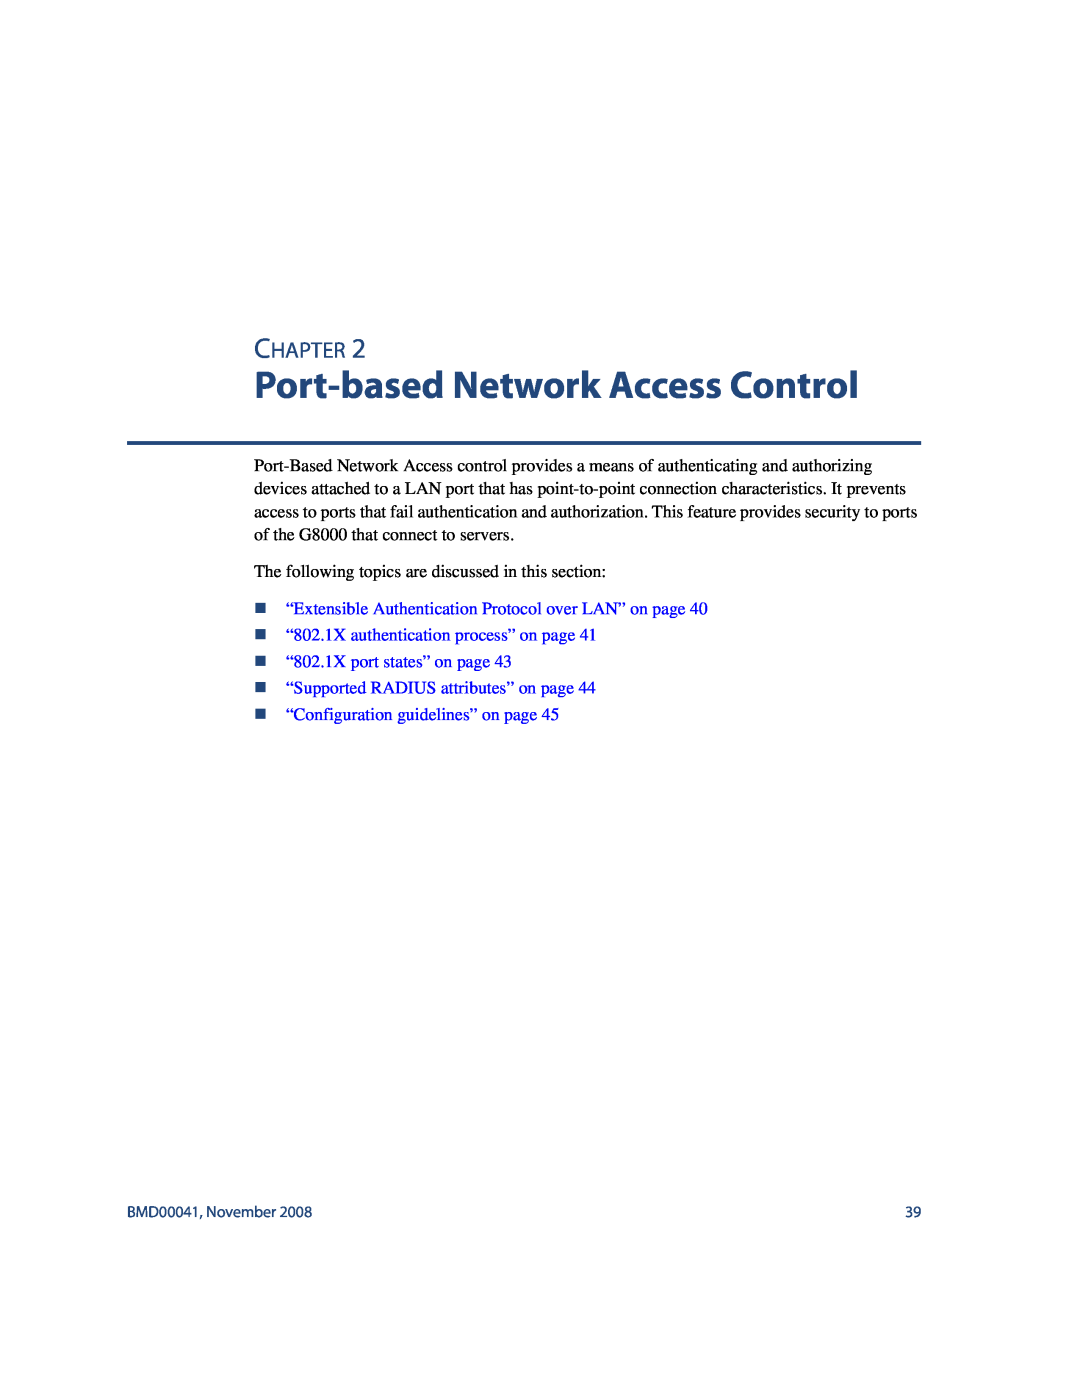 Blade ICE G8000 manual Port-based Network Access Control, Chapter, „ “Extensible Authentication Protocol over LAN” on page 